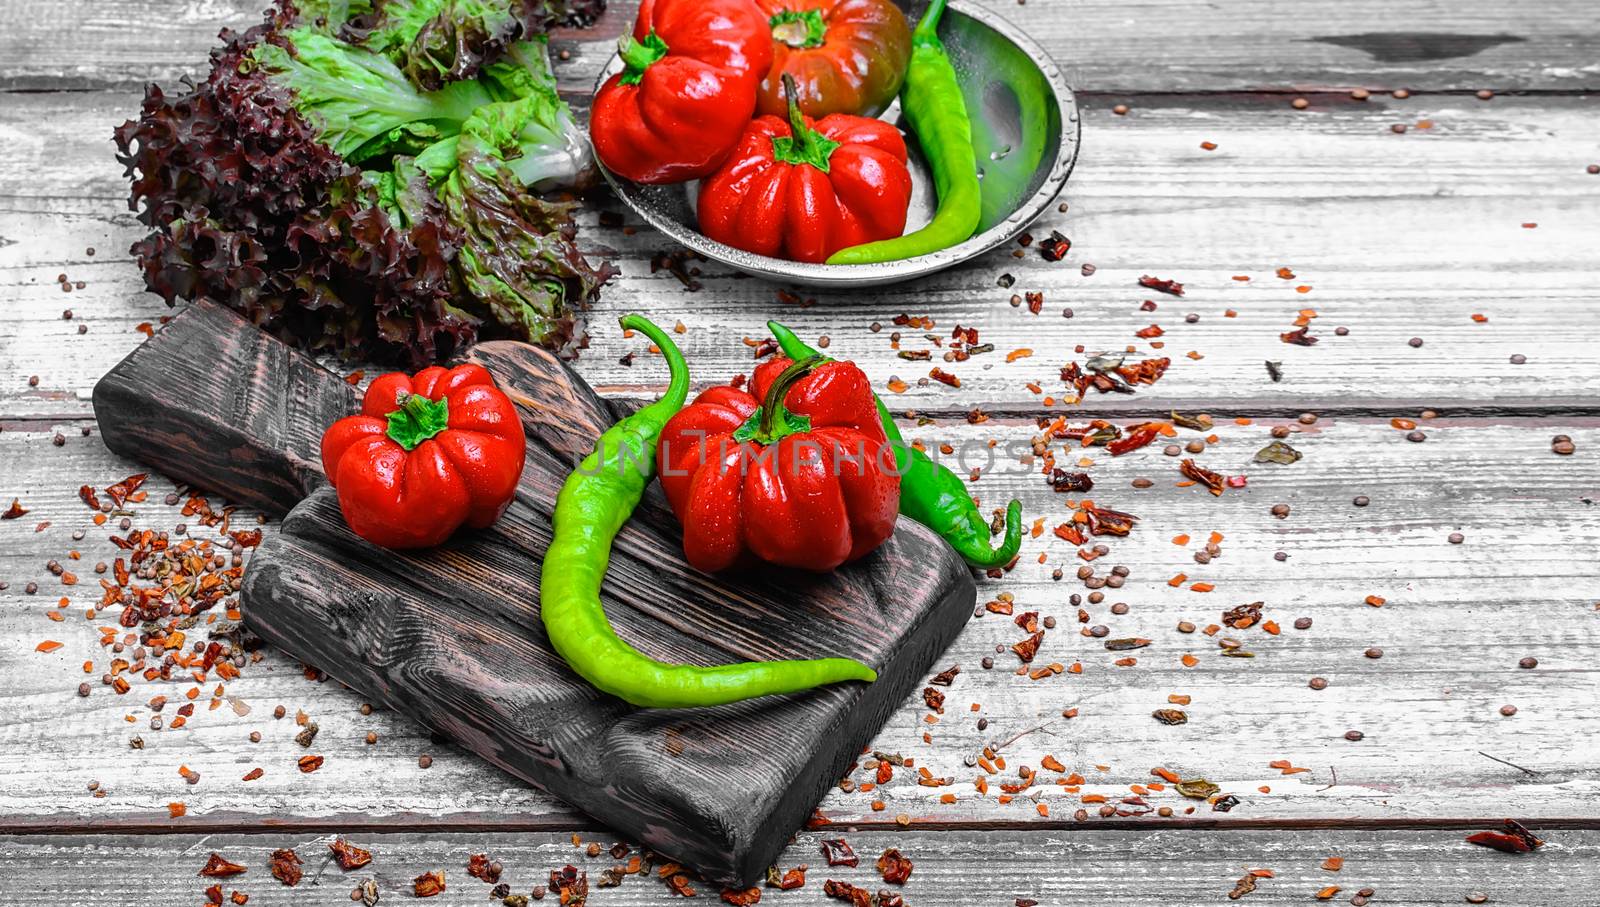 red pepper and paprika on iron plate with bright light background with spices